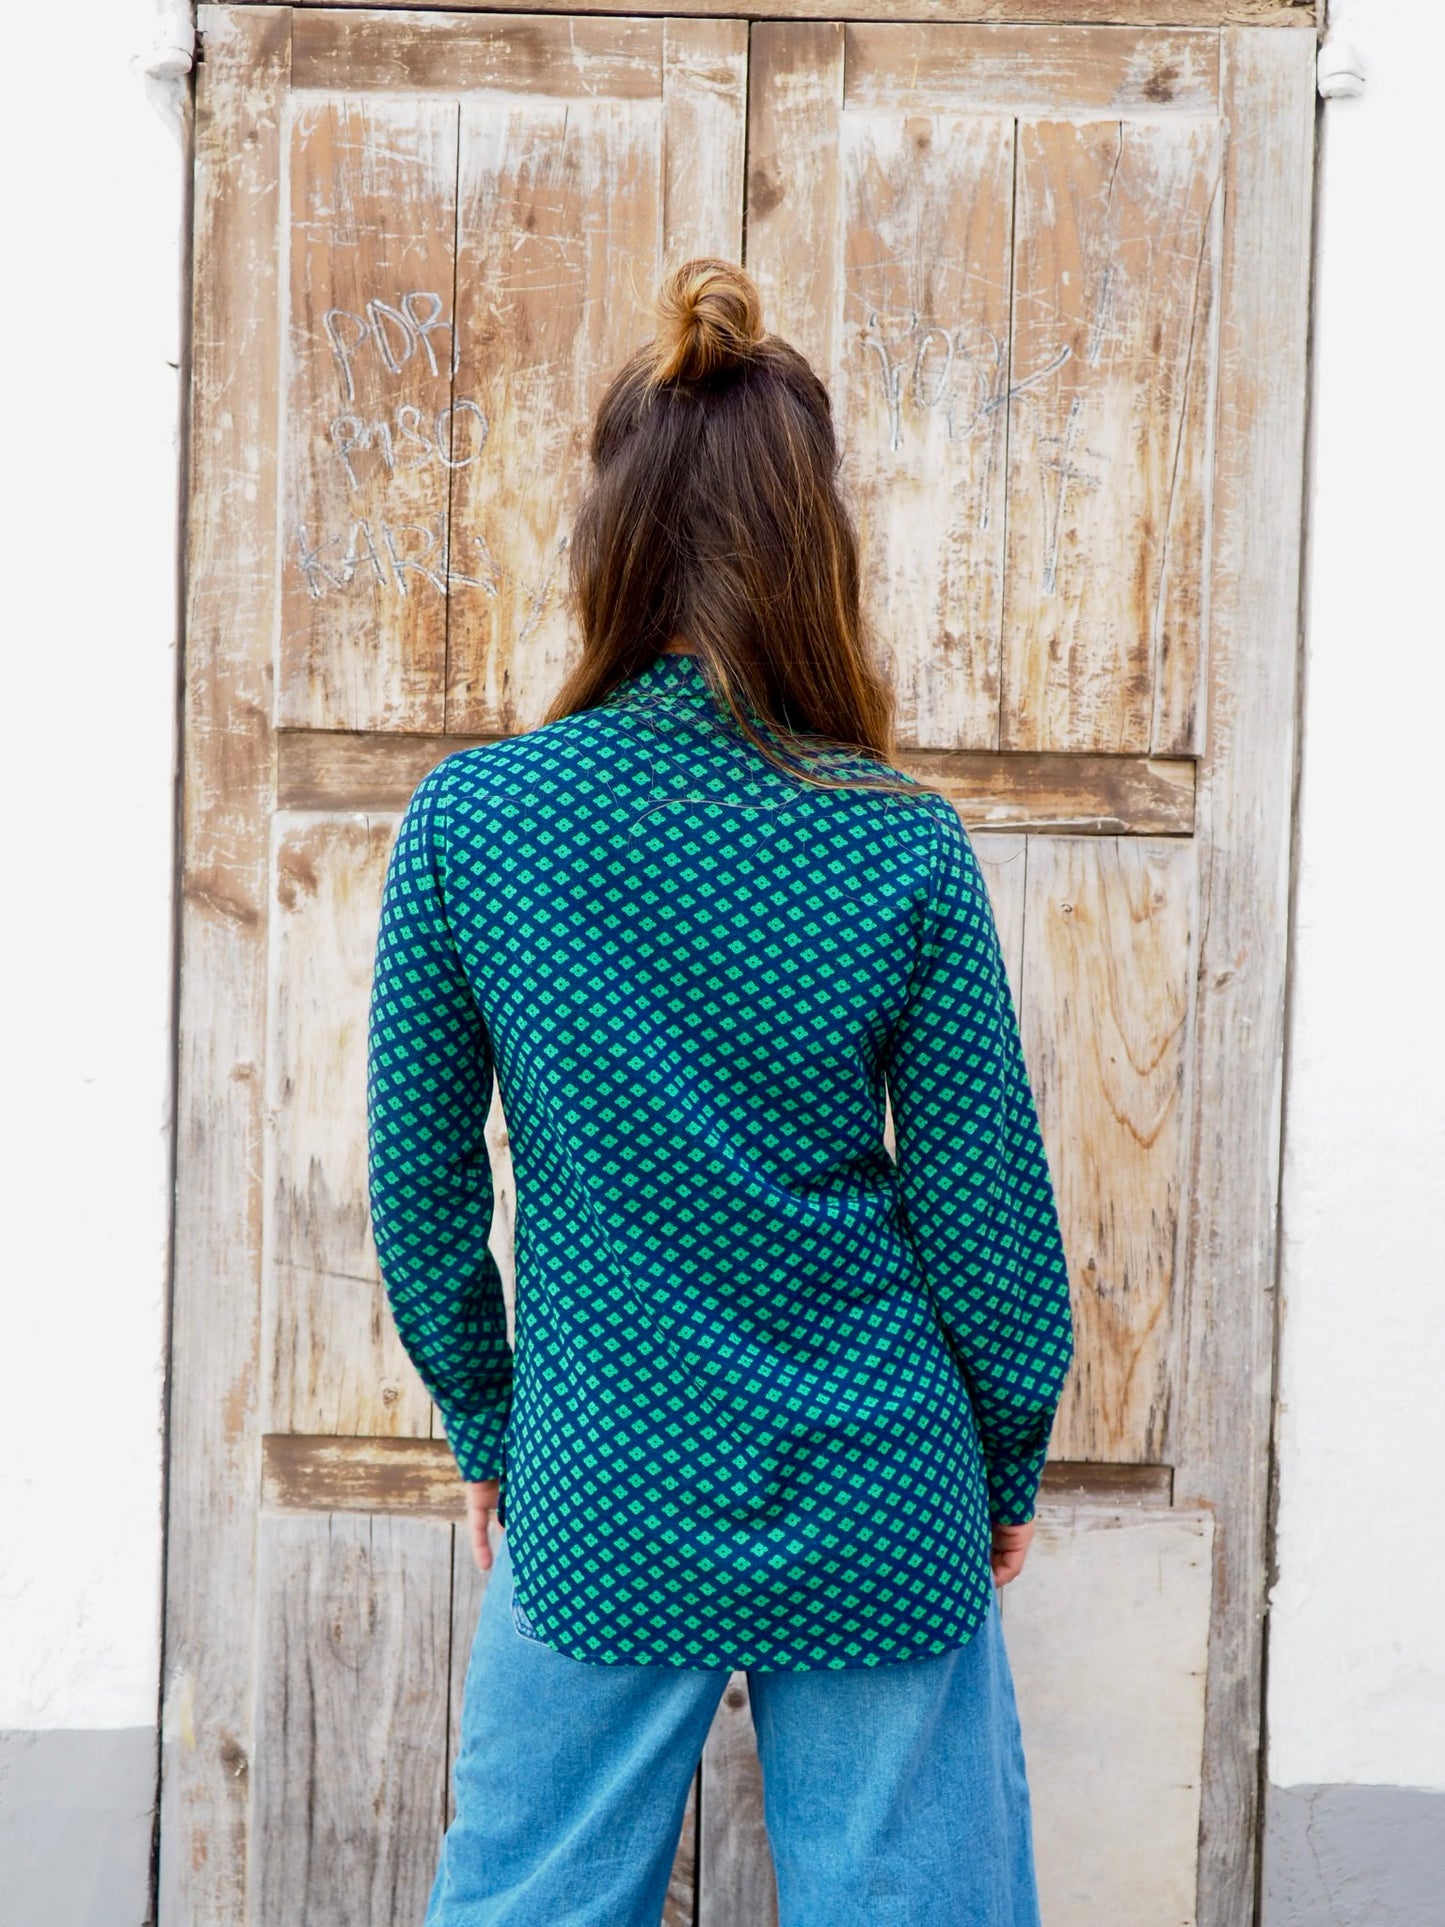 Original vintage 70’s cool printed knitted shirt with large collar in blue and green simple geometric design